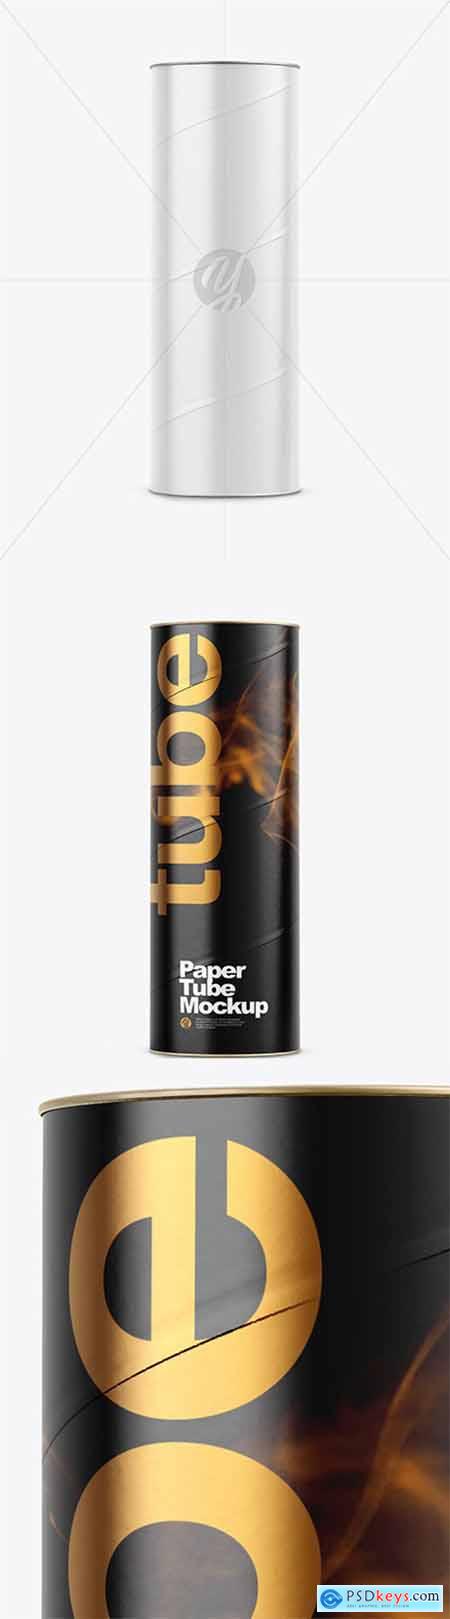 Download Glossy Paper Tube Mockup 51051 Free Download Photoshop Vector Stock Image Via Torrent Zippyshare From Psdkeys Com